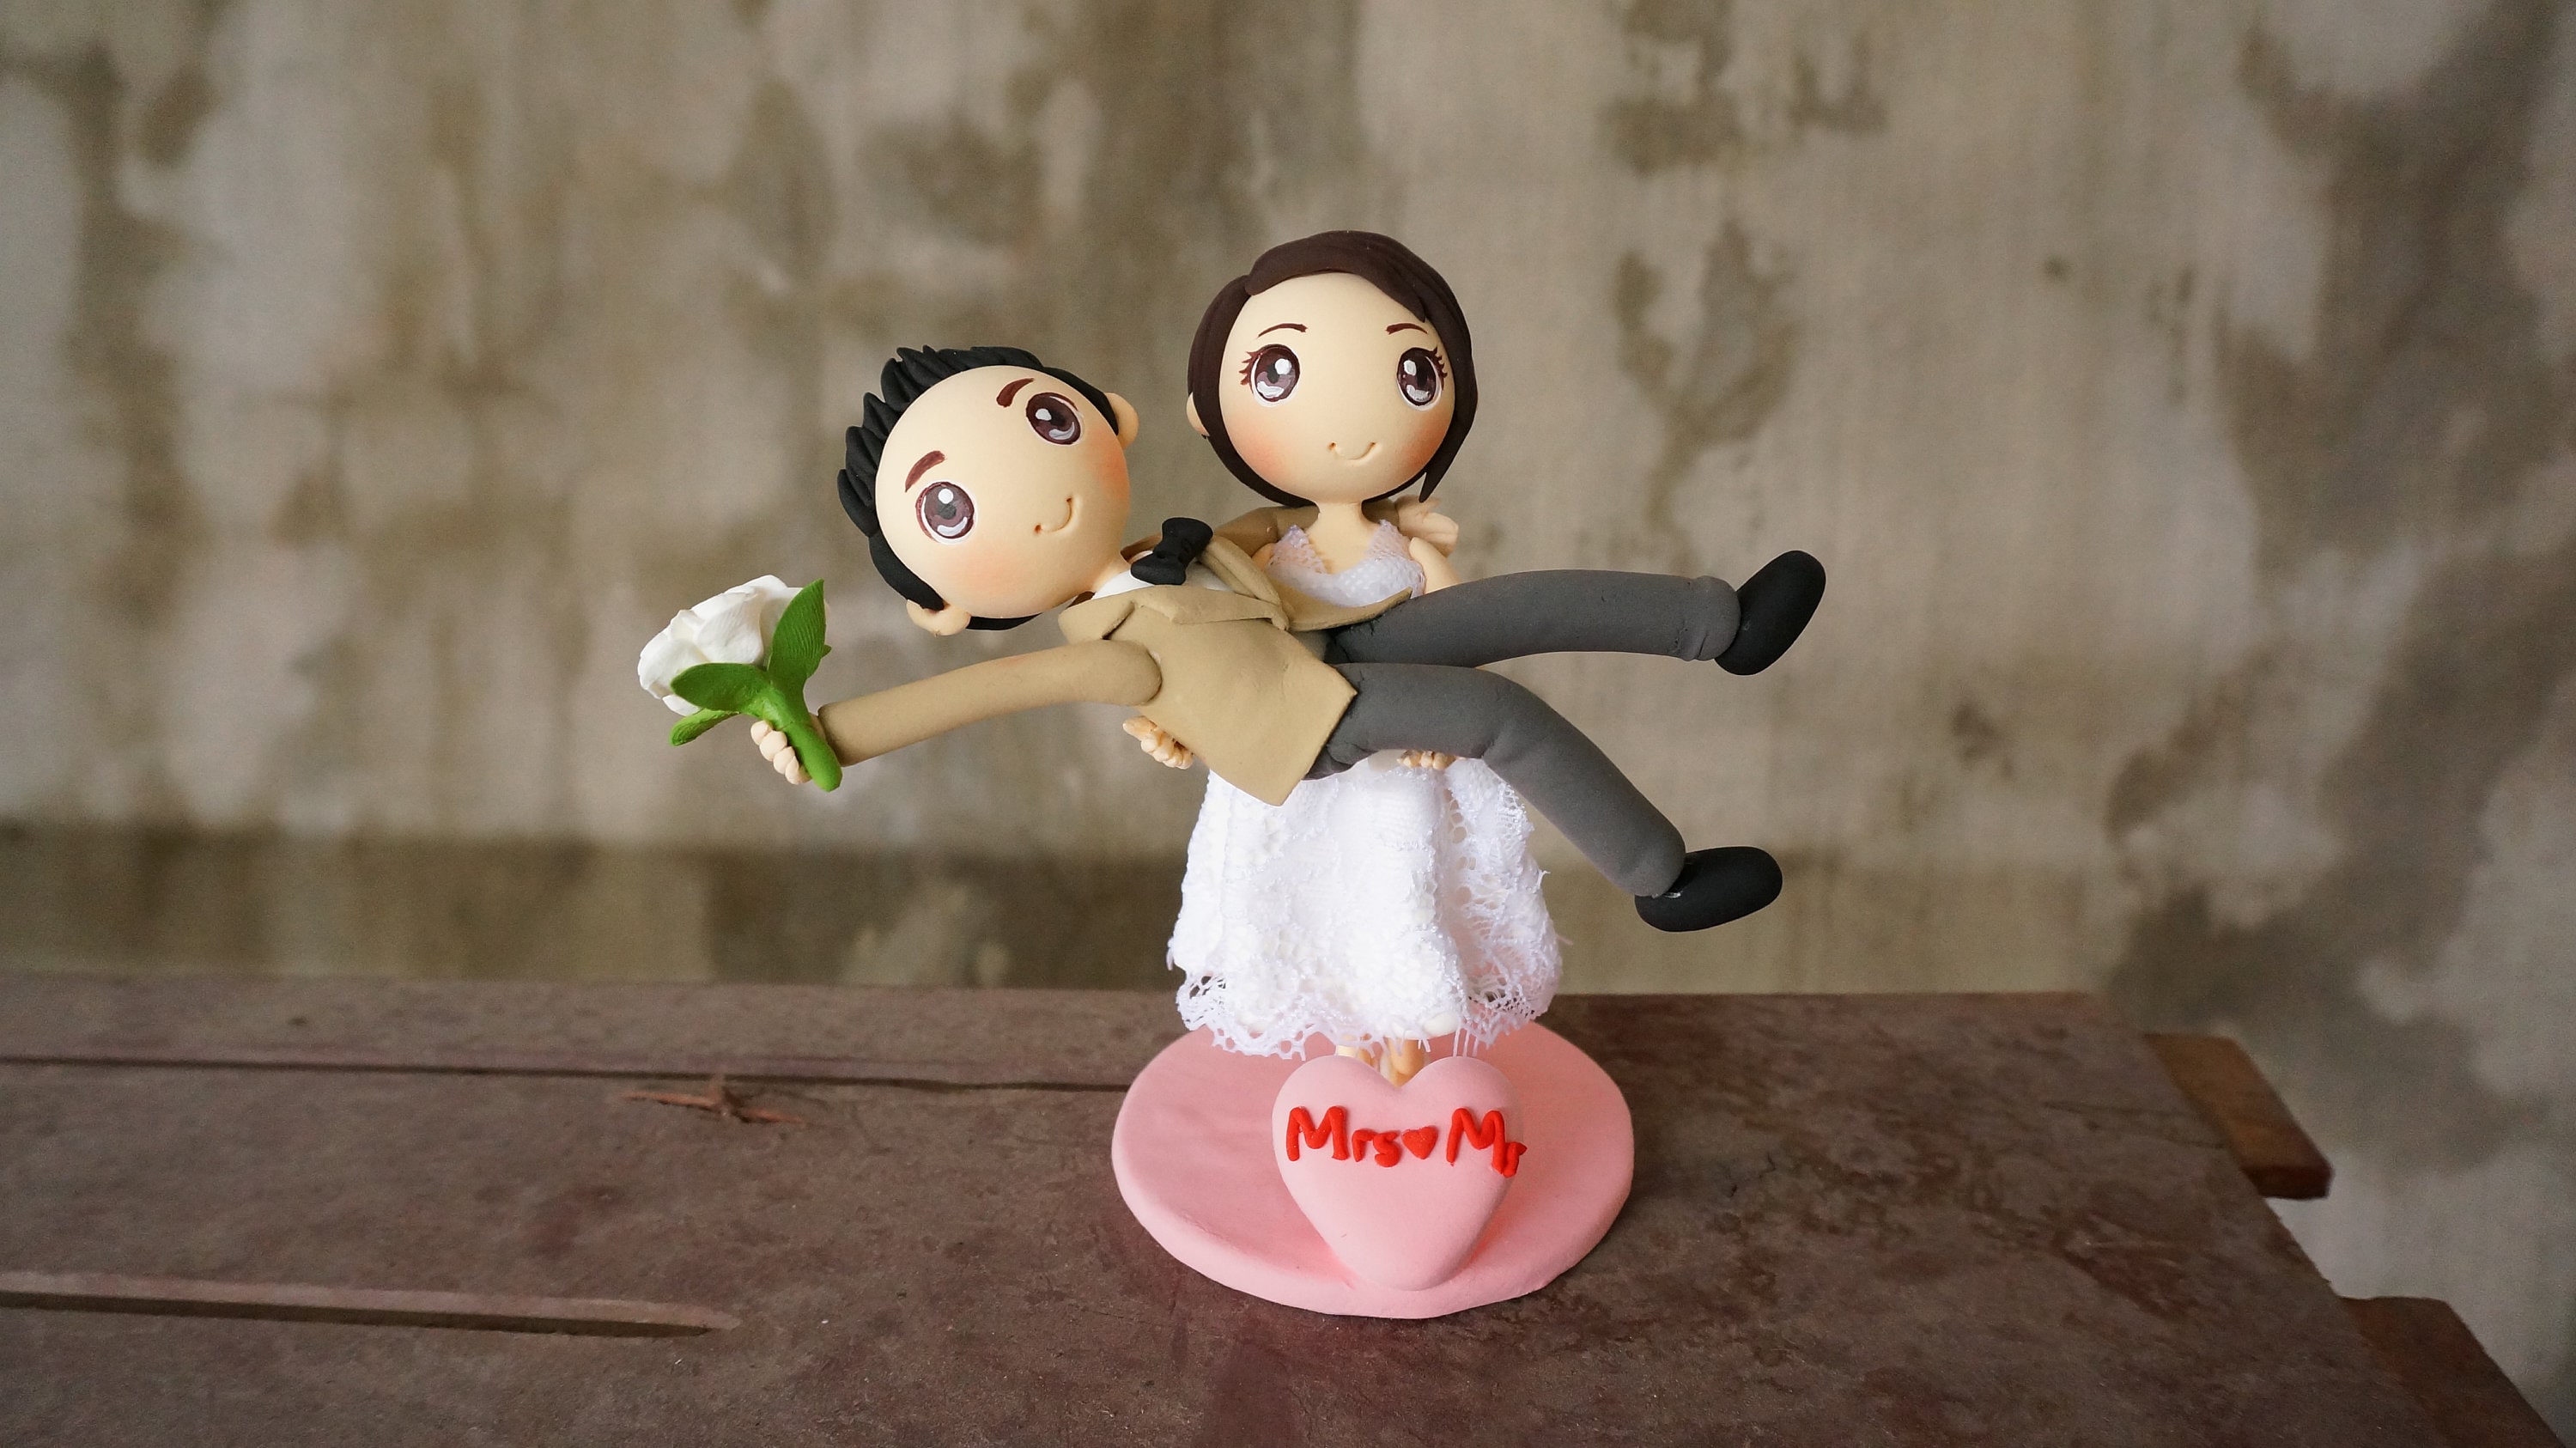 WEDDING CAKE TOPPER For Better or Worse bride carrying the groom wedding funny 